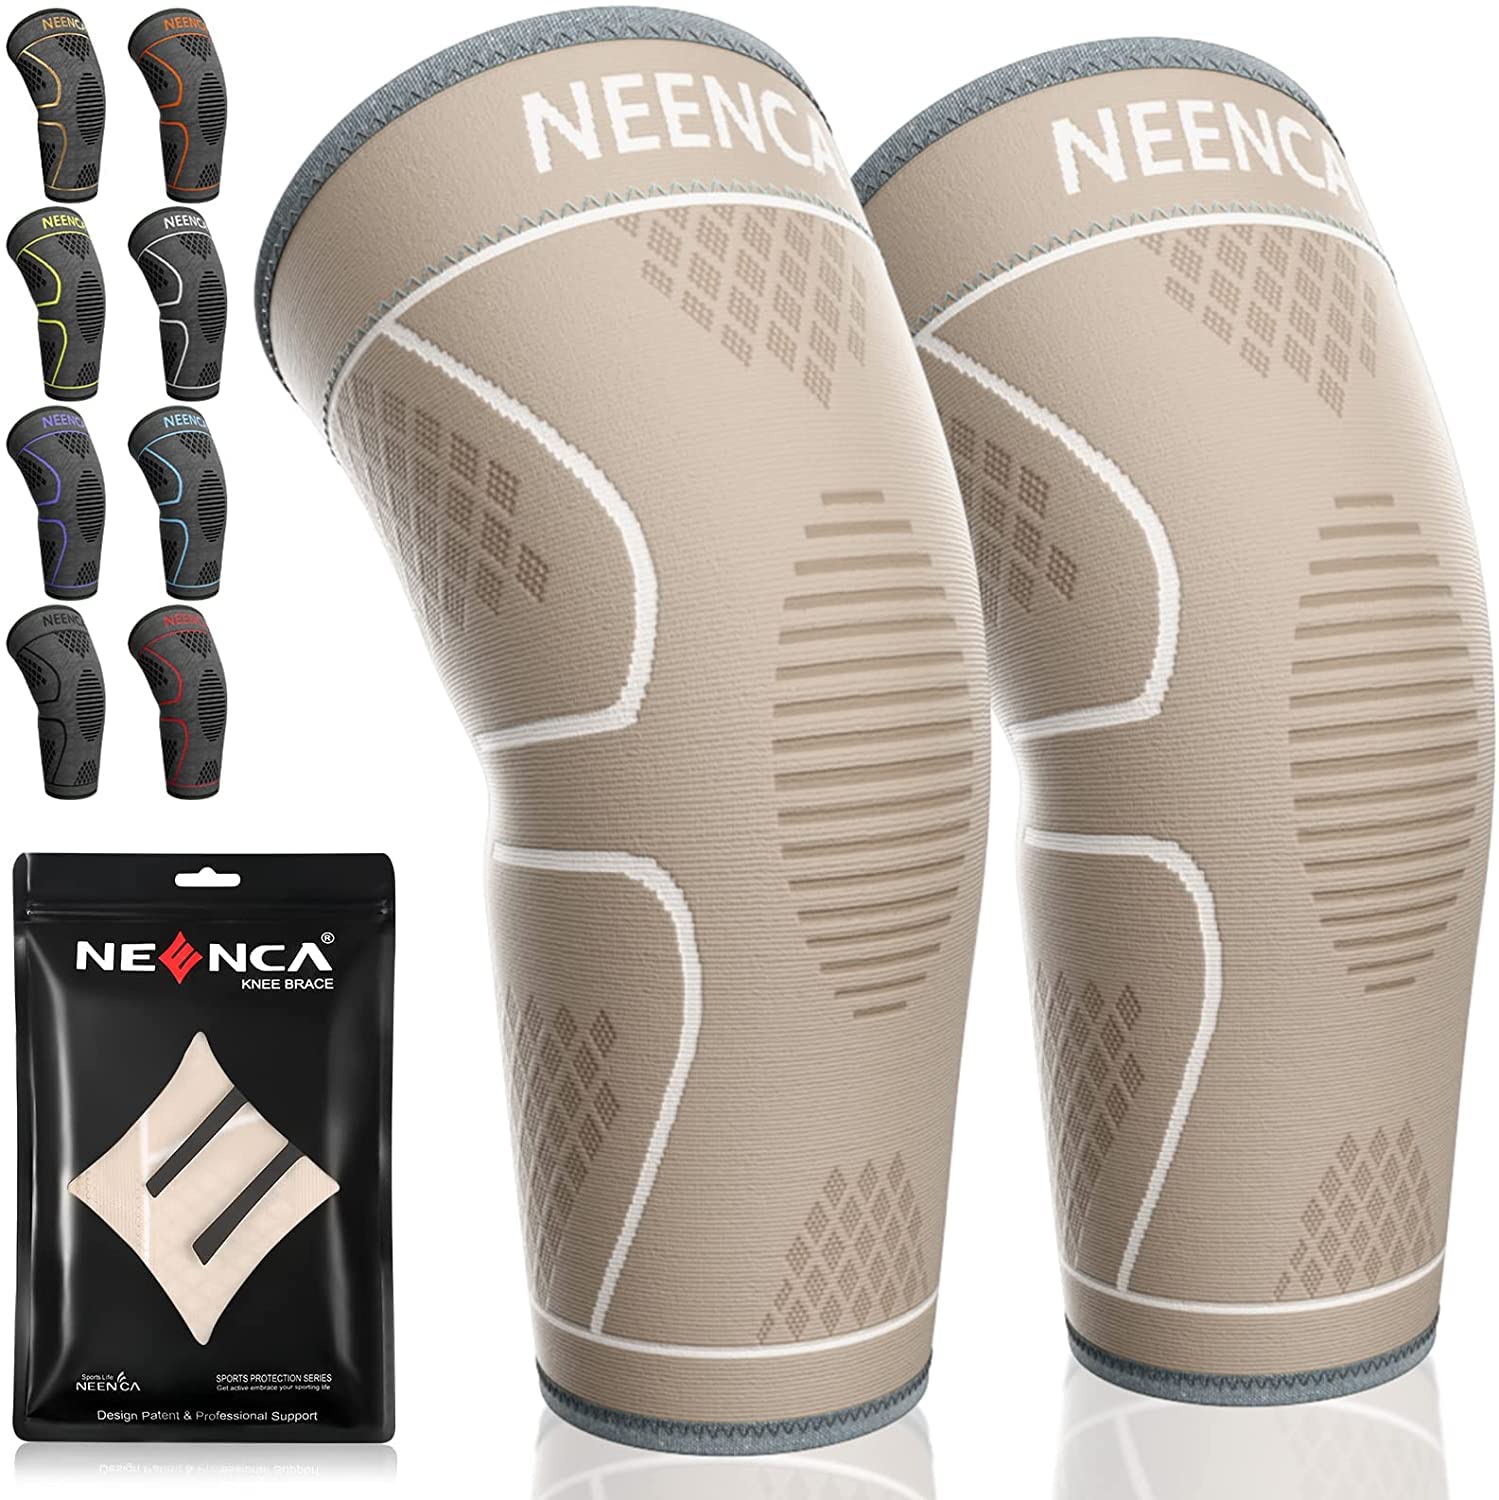 NEENCA Professional Knee Brace for Knee Pain, Adjustable Hinged Knee  Support with Patented X-Strap Fixing System, Strong Stability for Jonit  Pain